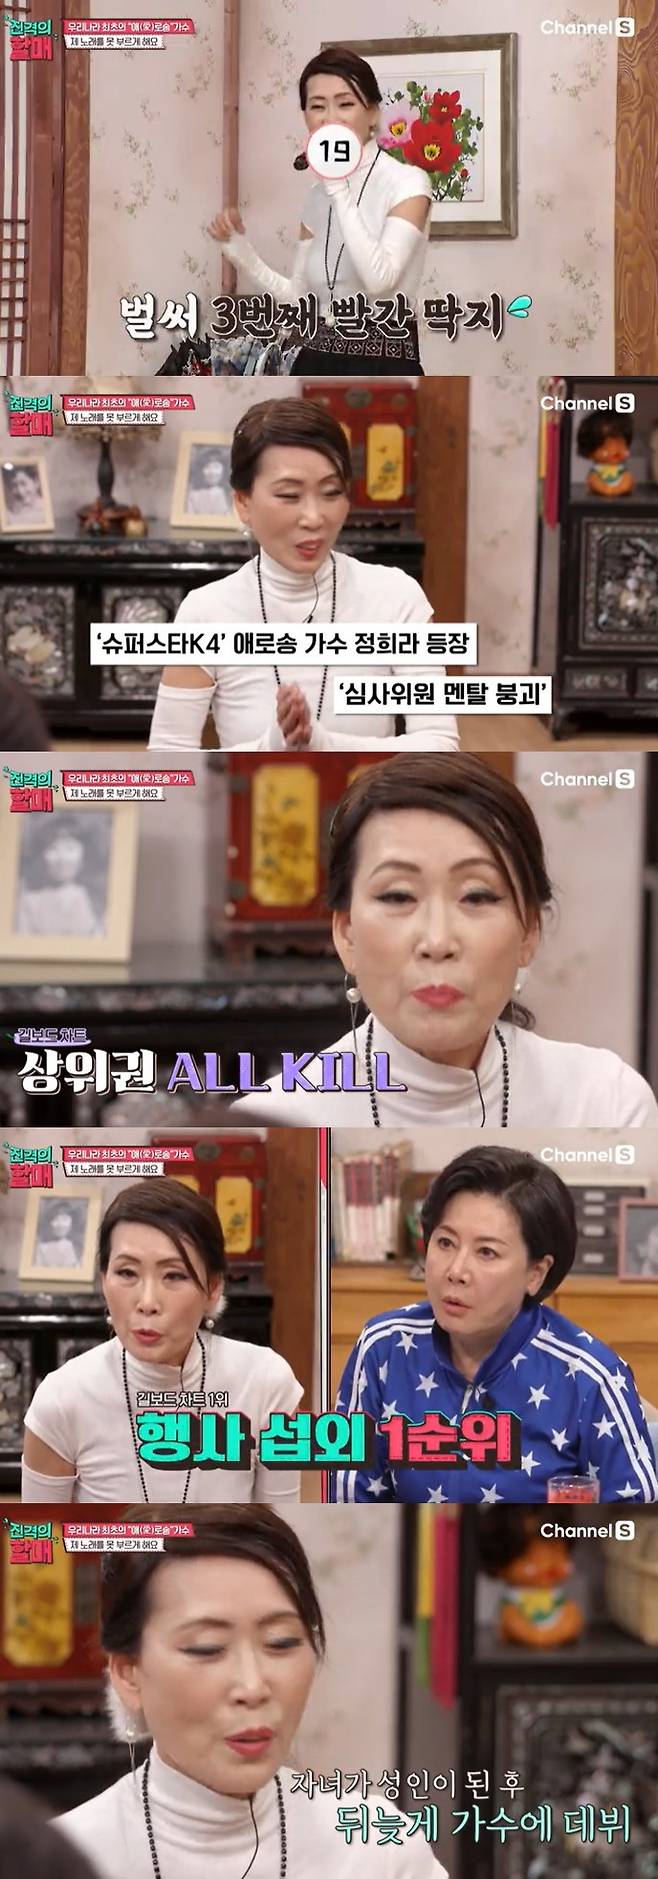 Arrosong singer Jung Hee-ra revealed his grievances according to his job.On March 15, Channel S Attack on Titan, 1 million singer Jung Hee-ra appeared.Jung Hee-ra said, Even though I sold more than one million albums, the song is too old to sing my song at the broadcasting station.His main genre is a hard song.I was curious that it was the first genre I heard in my life, and Jung Hee introduced that there are seeing newspapers, sauce tari, good for big, and baseball mongoon.At the request of the grandmothers, Jung Hee-ra showed a live stage called See the Newspaper. Most of the lyrics were mosaiced, and the grandmothers were blushing and unable to speak.Park Jung-soo took the school this is not broadcast by anyone.Na Moon-hee said, Have you ever appeared on the air with a song? And Jung Hee-ra called Sauce Tari saying, I have been to Superstar K.I finally came out with a groaning sound effect sound, said Jung Hee-ra. After that, I came to the morning yard and I refused because there was no traditional song album (not a song of trouble) at the time.Jung Hee-ra said, I heard the troubles during the couples fight, and the eyes were solved, and I was angry at the noise between the floors, and I was angry at the floor and solved the problem.Jung Hee-ra said, I thought that after 10 years or 20 years, the sexually open atmosphere would be formed and it would become popular, but I can not call it even after 20 years.Park Jung-soo cant sing no matter how time passes; go to America and call it; not even after 30 years, flying Say Straight.Jung Hee-ra said, I was sweeping the top of the Gilboard charts at the time. At that time, the sound source revenue was 4 ~ 5 million won a month.But (because of the composers conviction) the event was not much done, he added, There are a lot of conferrals.Asked about the Familys response, he said: Husband was a pastoral family so much opposed; never heard; instead, the children cheer their mom because they were already big.